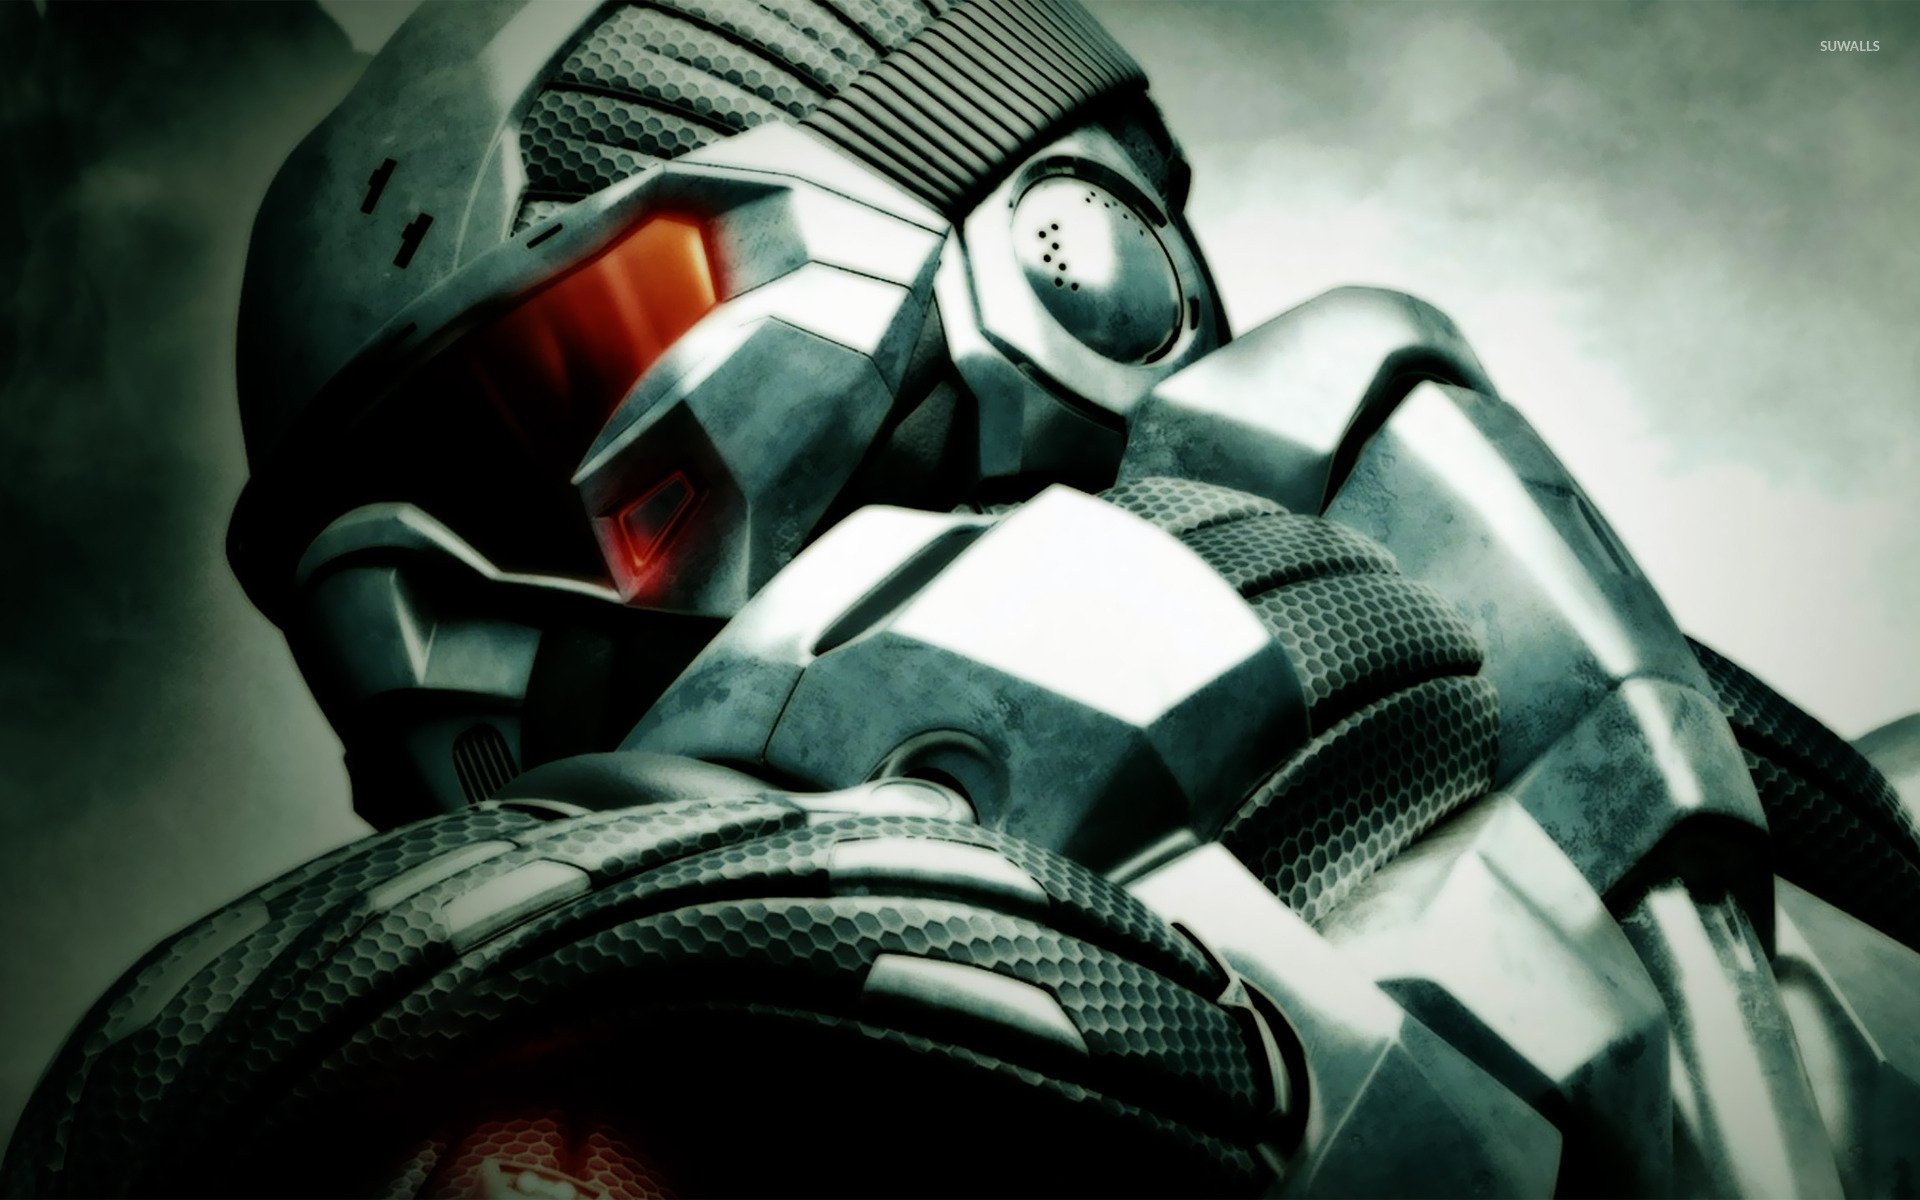 Download Crysis Remastered High Definition Gameplay Wallpaper | Wallpapers .com